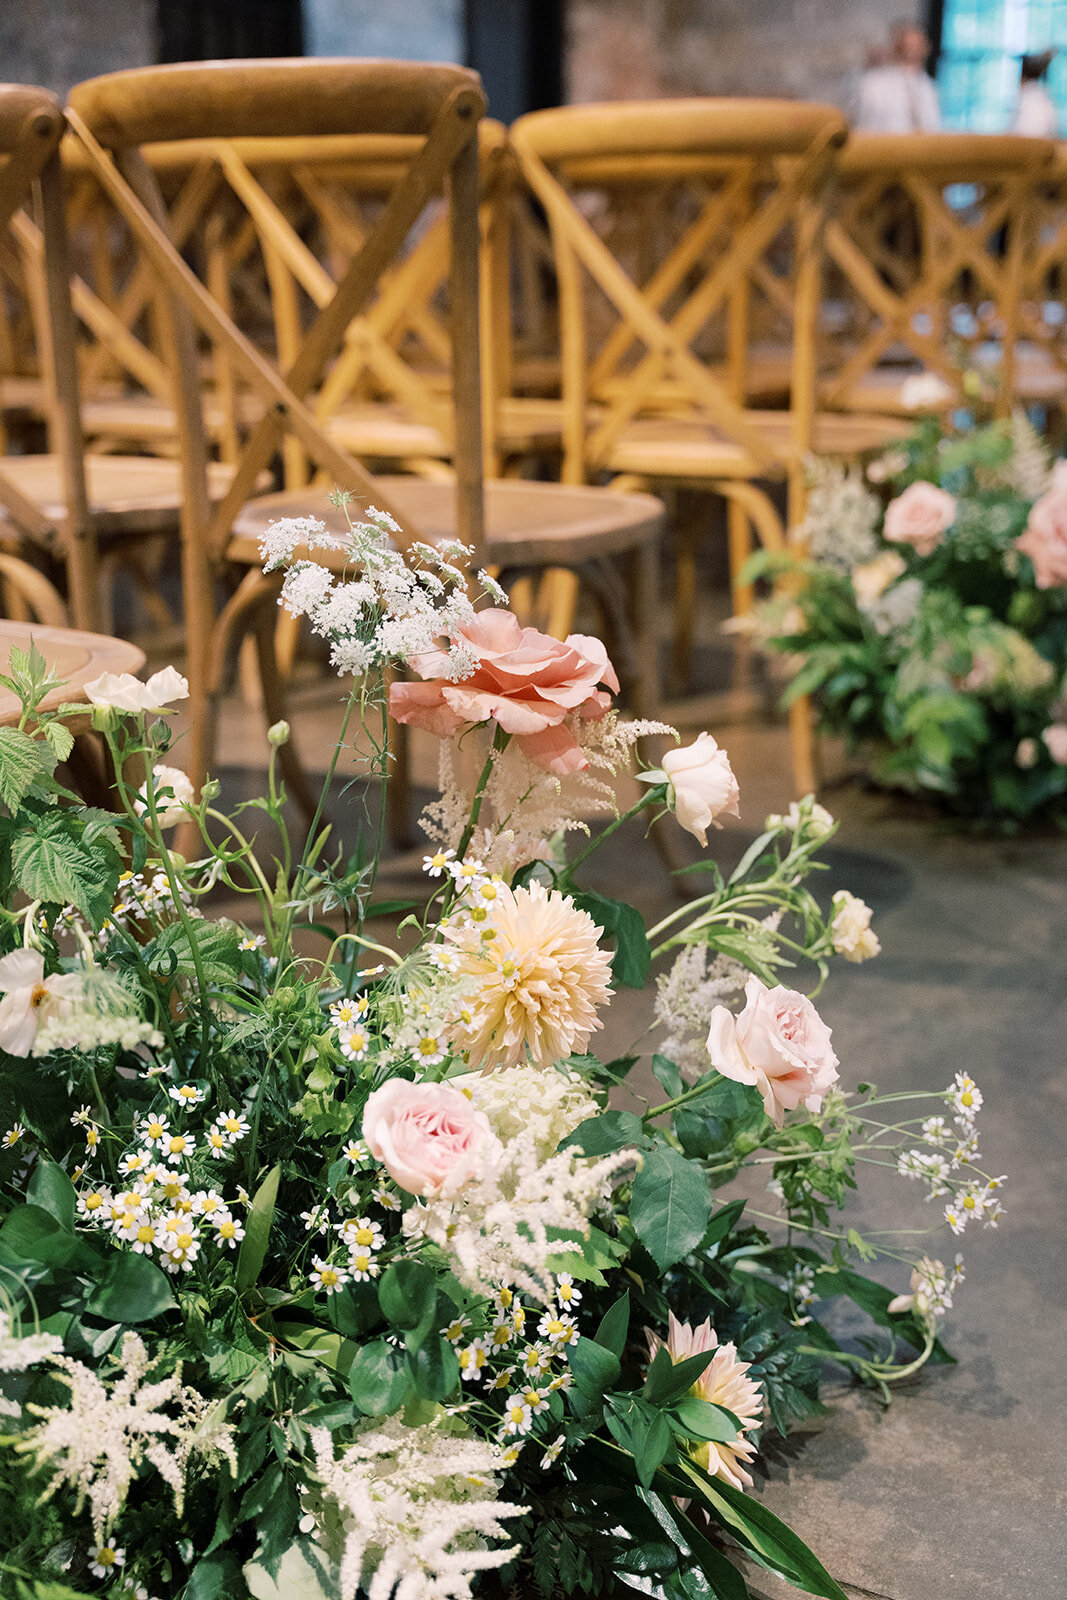 Close-up of floral aisle meadow arrangement with lush greenery, queen anns lace, blush and pink garden roses, daisies, white astilbe and tan dahlias.